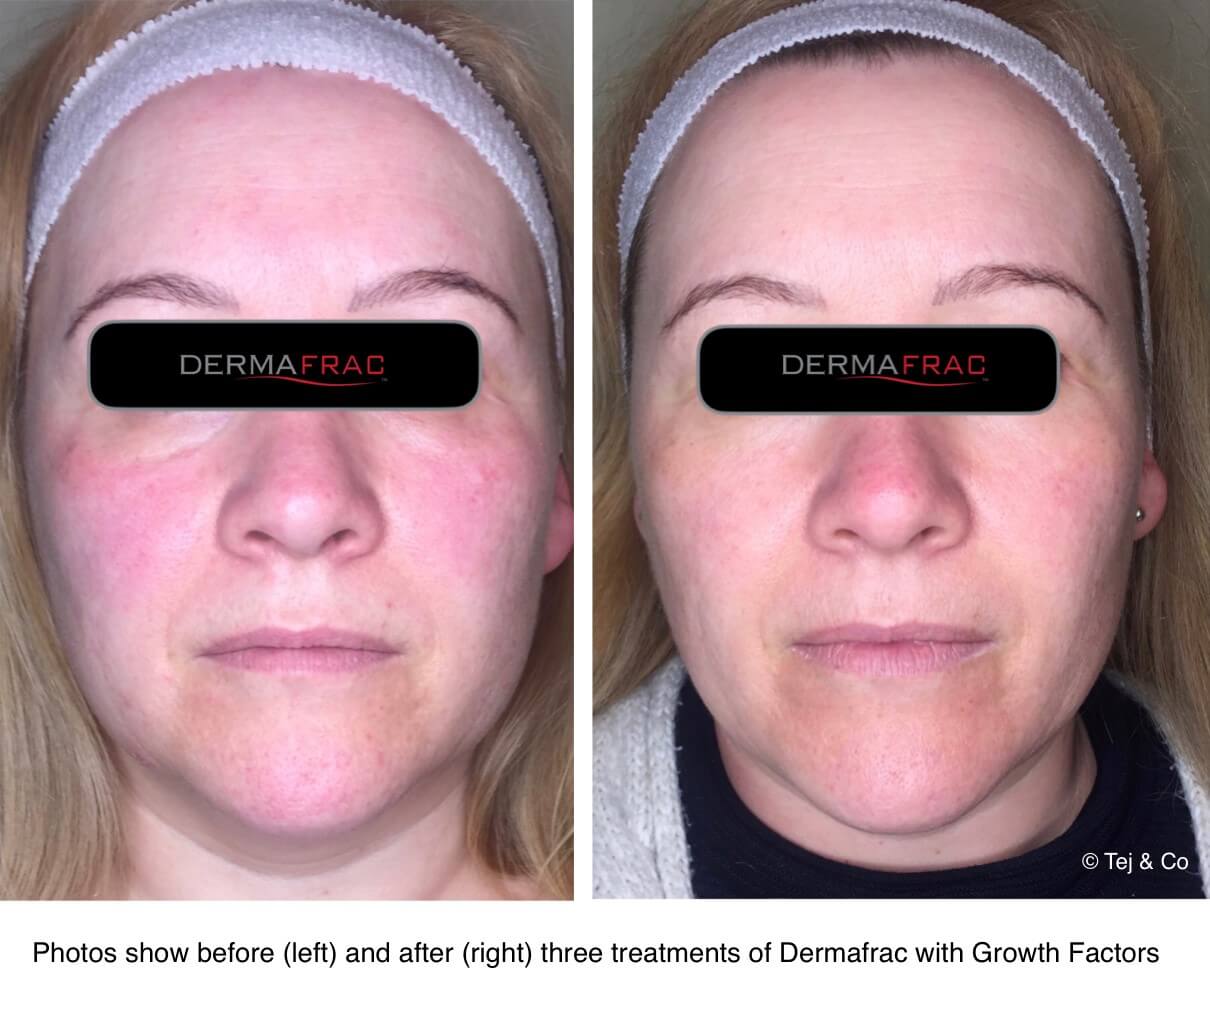 Dermafrac before and after